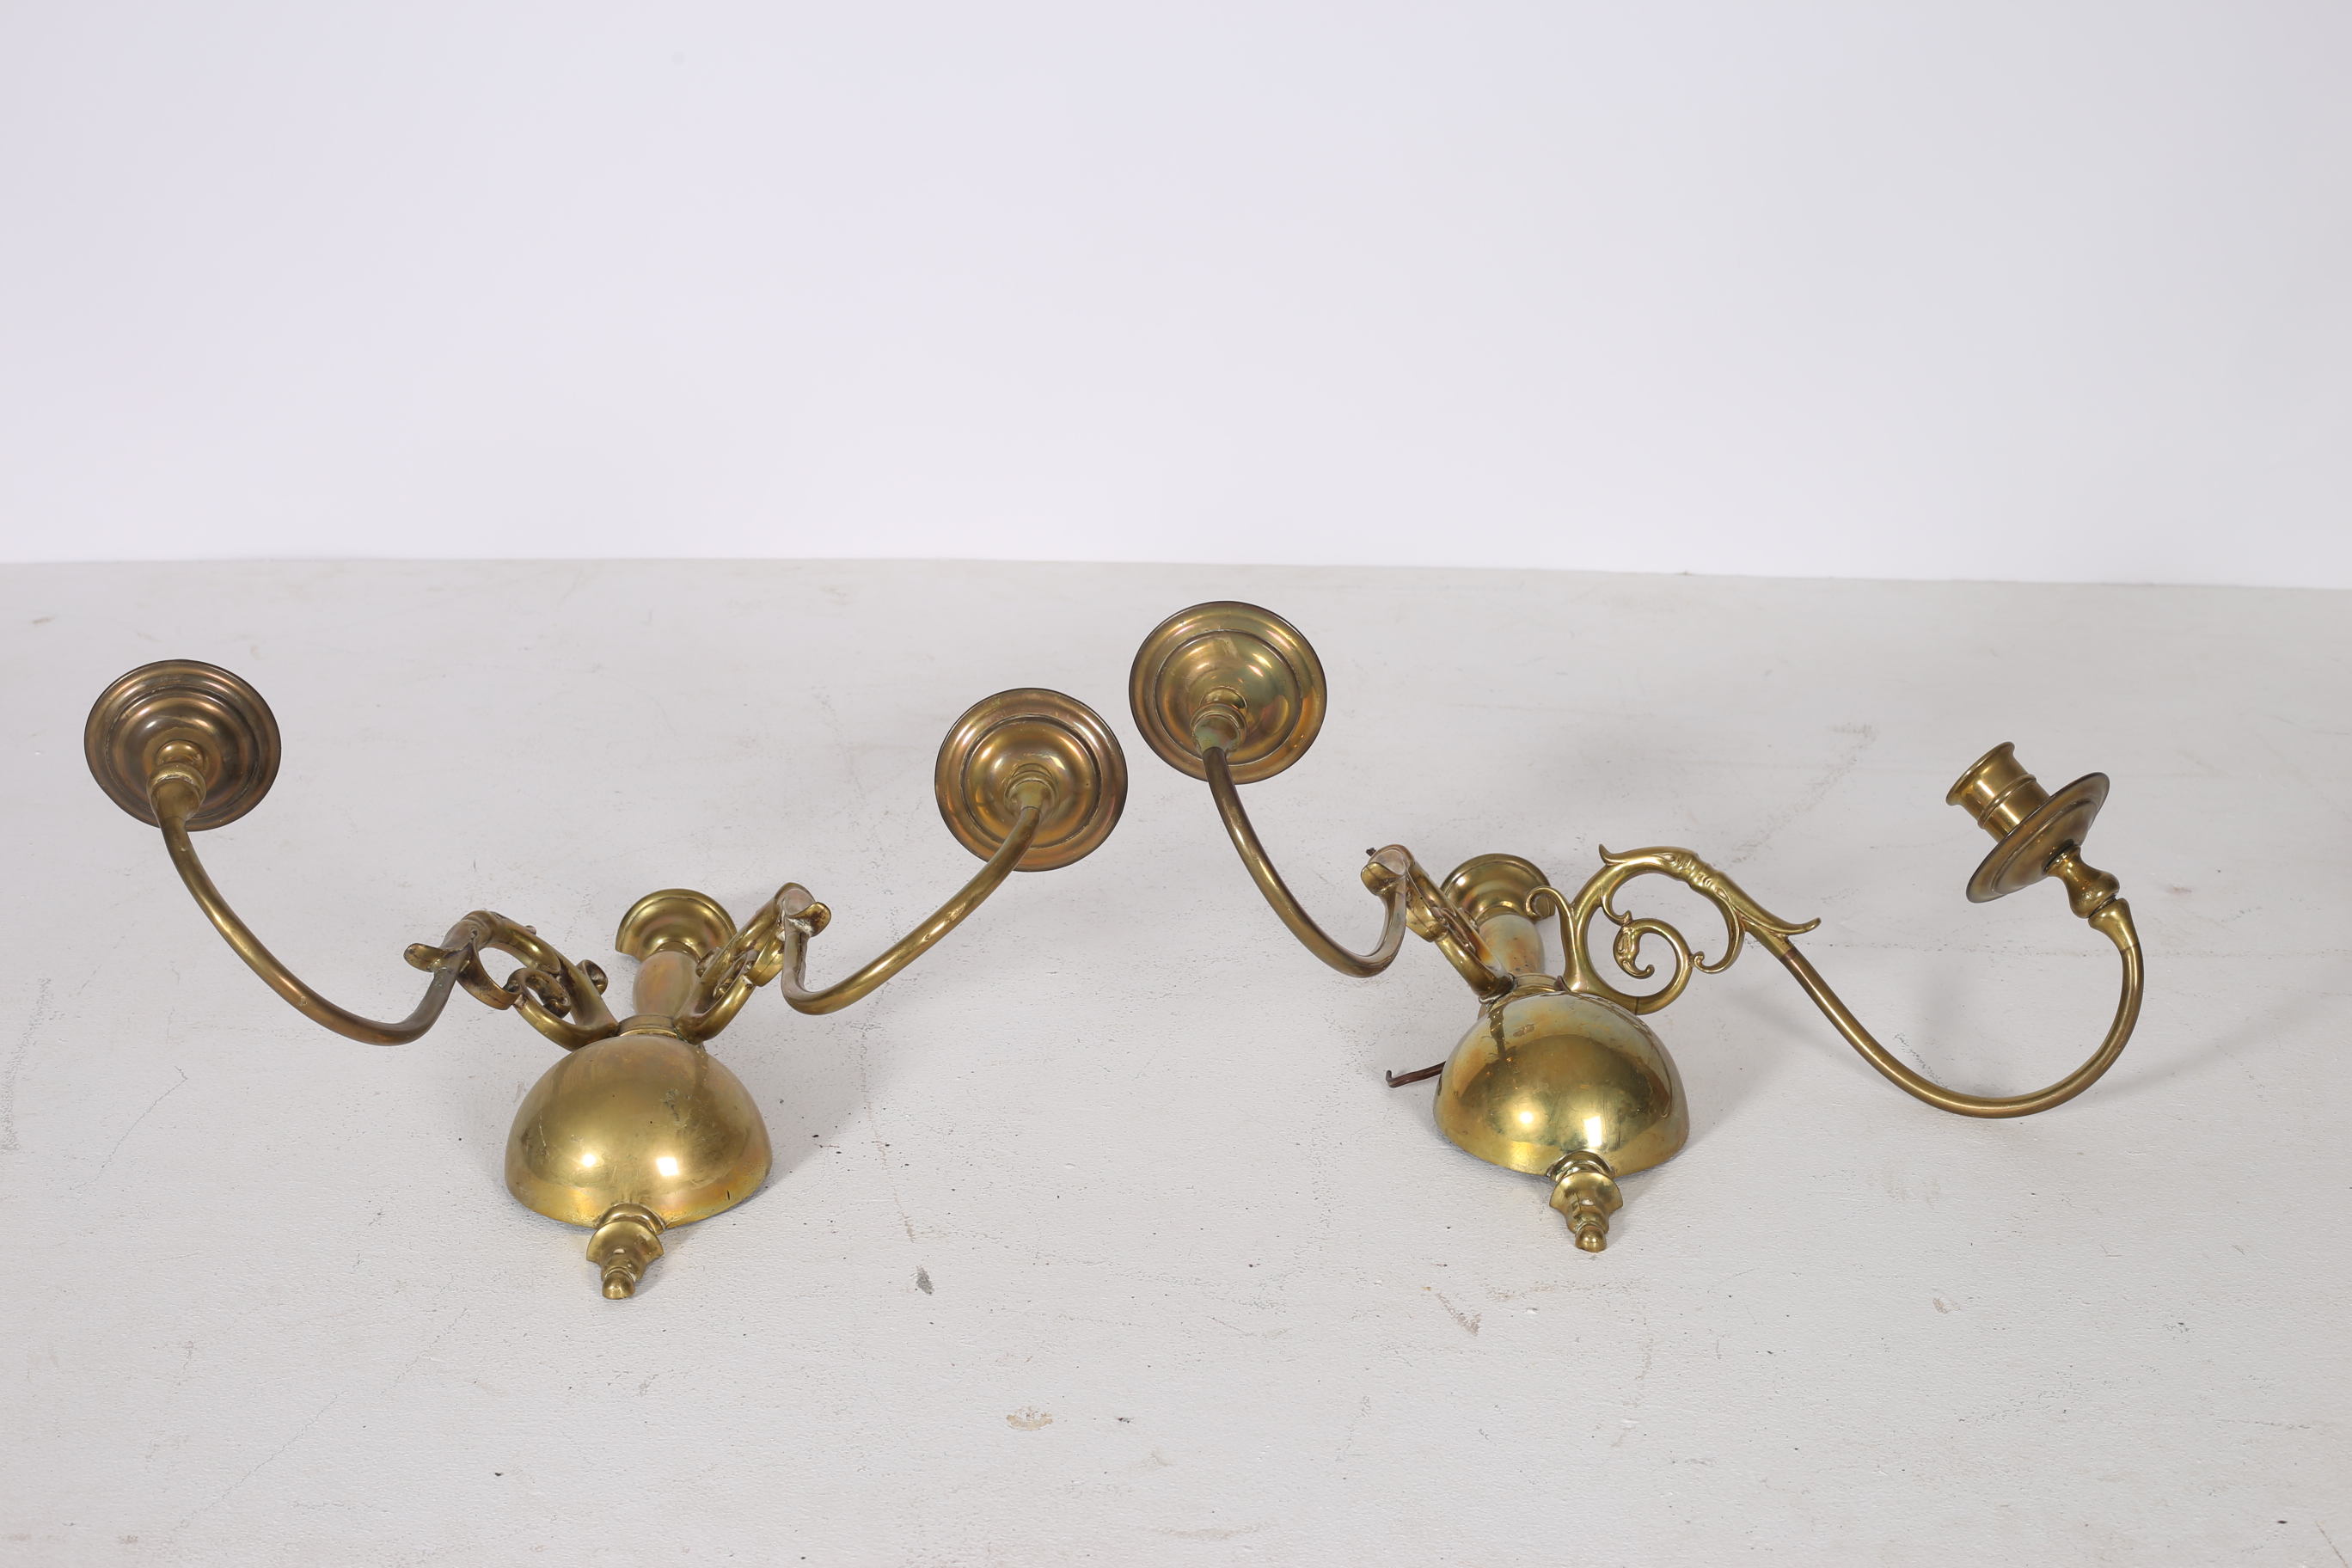 A PAIR OF BRASS TWO BRANCH WALL SCONCES each with a urn and bulbous back plate issuing two scroll